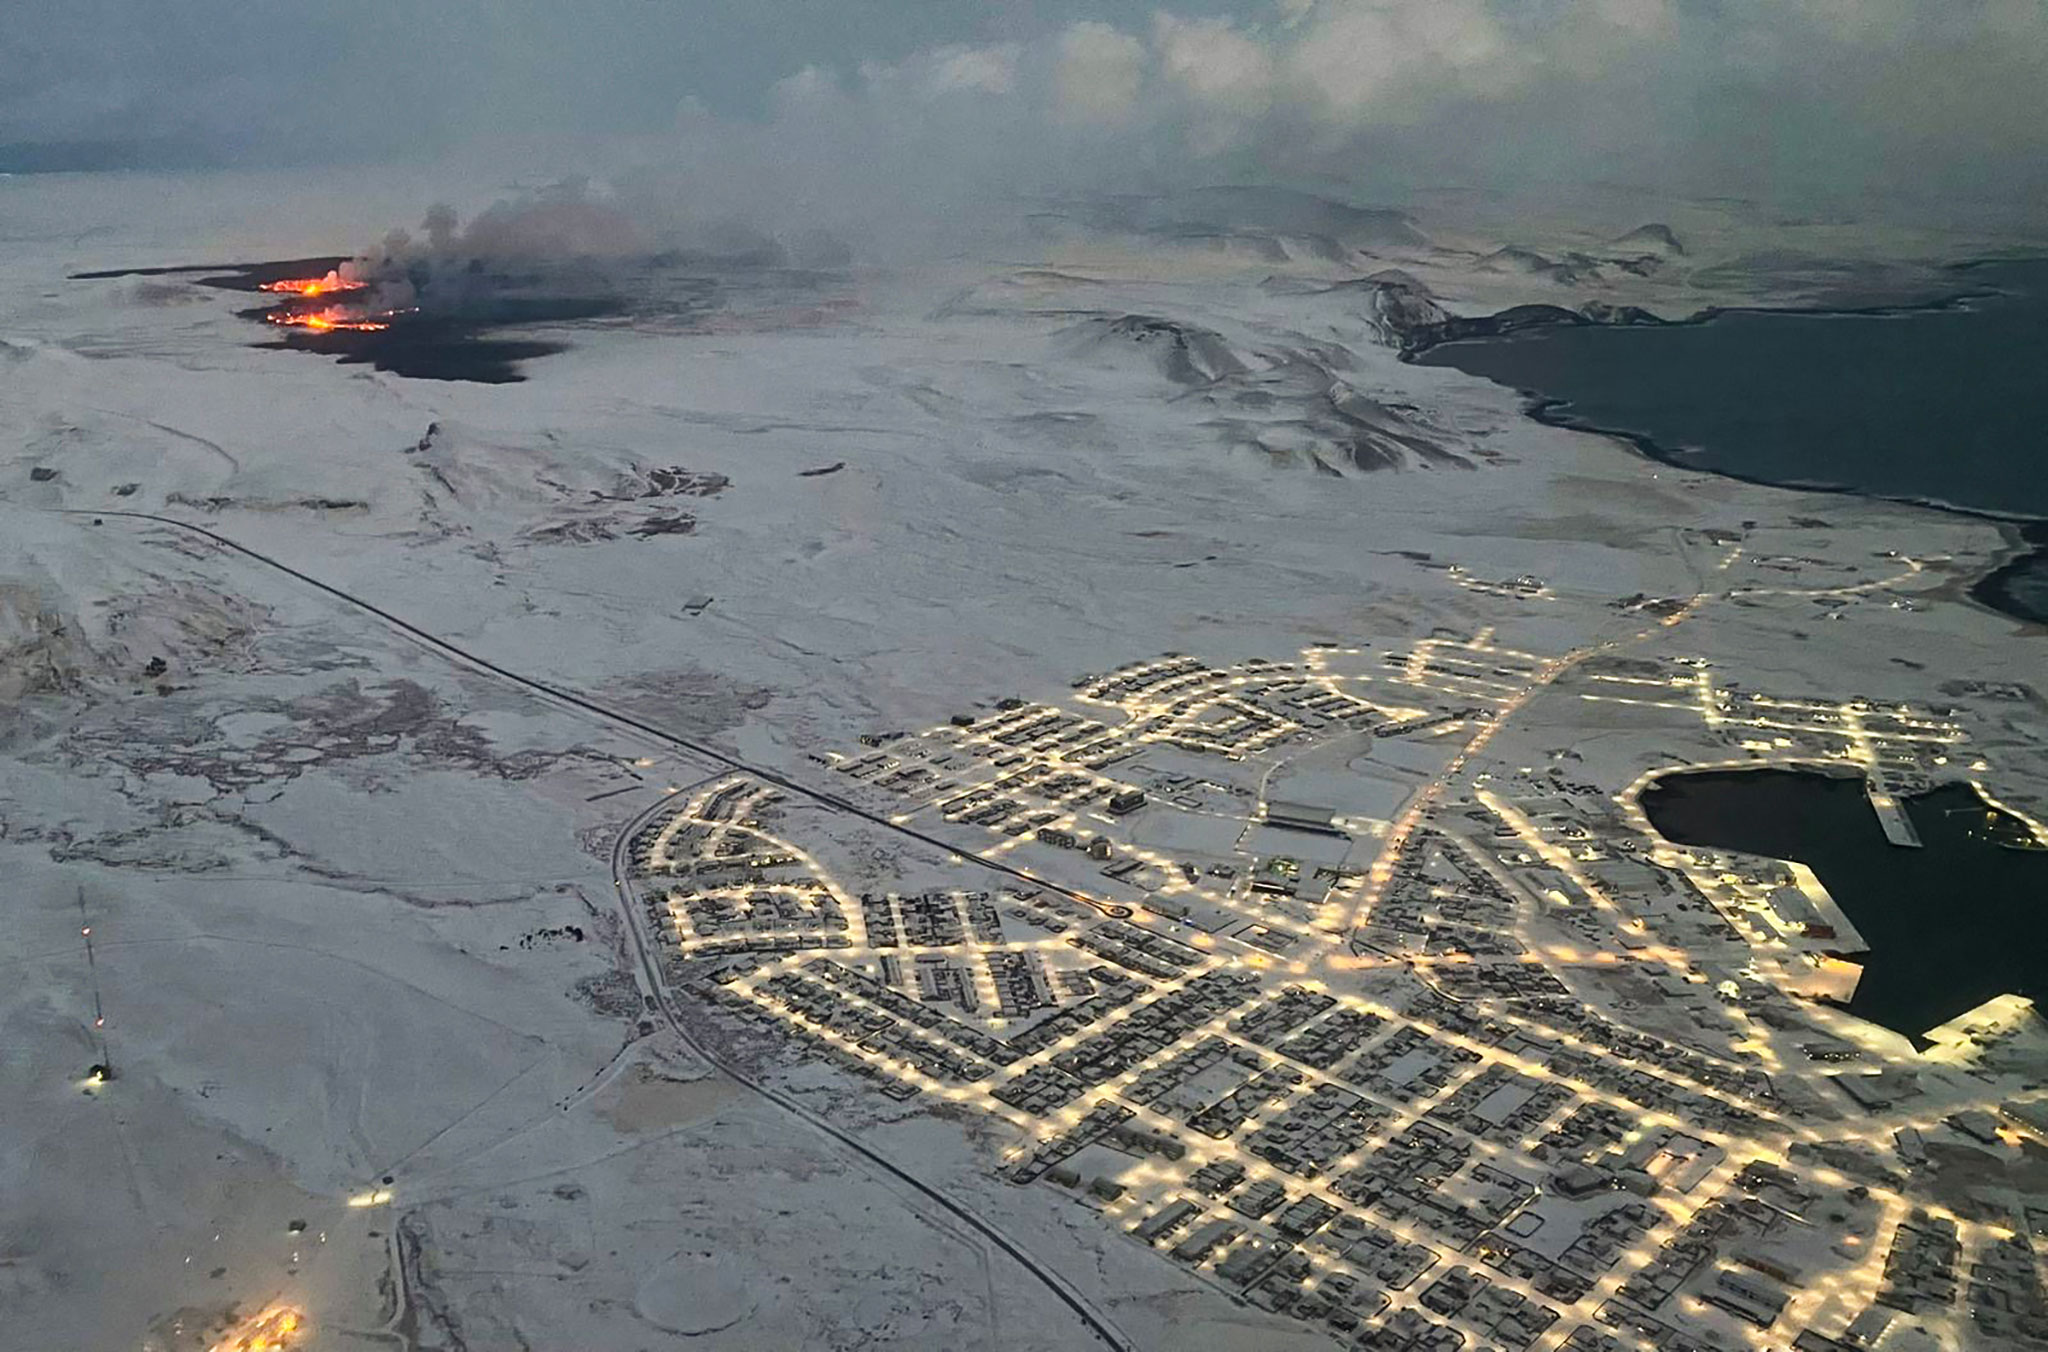 The evacuated Icelandic town of Grindavik is seen as smoke billows and lava is thrown into the air from a fissure on Tuesday.